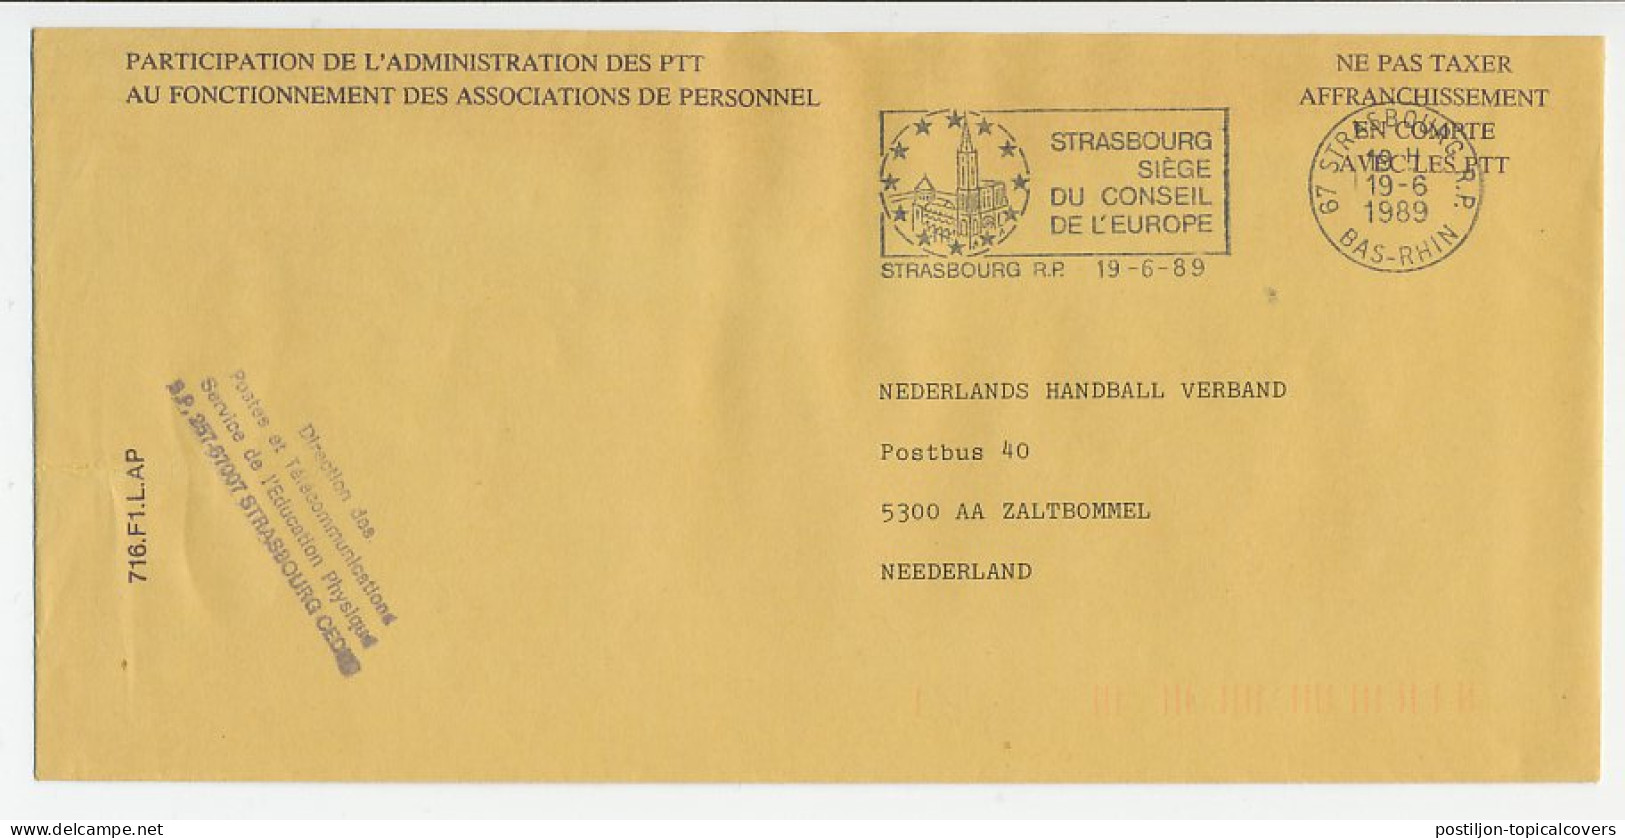 Service Cover / Postmark France 1989 Strasbourg Seat Of The Council Of Europe - Institutions Européennes